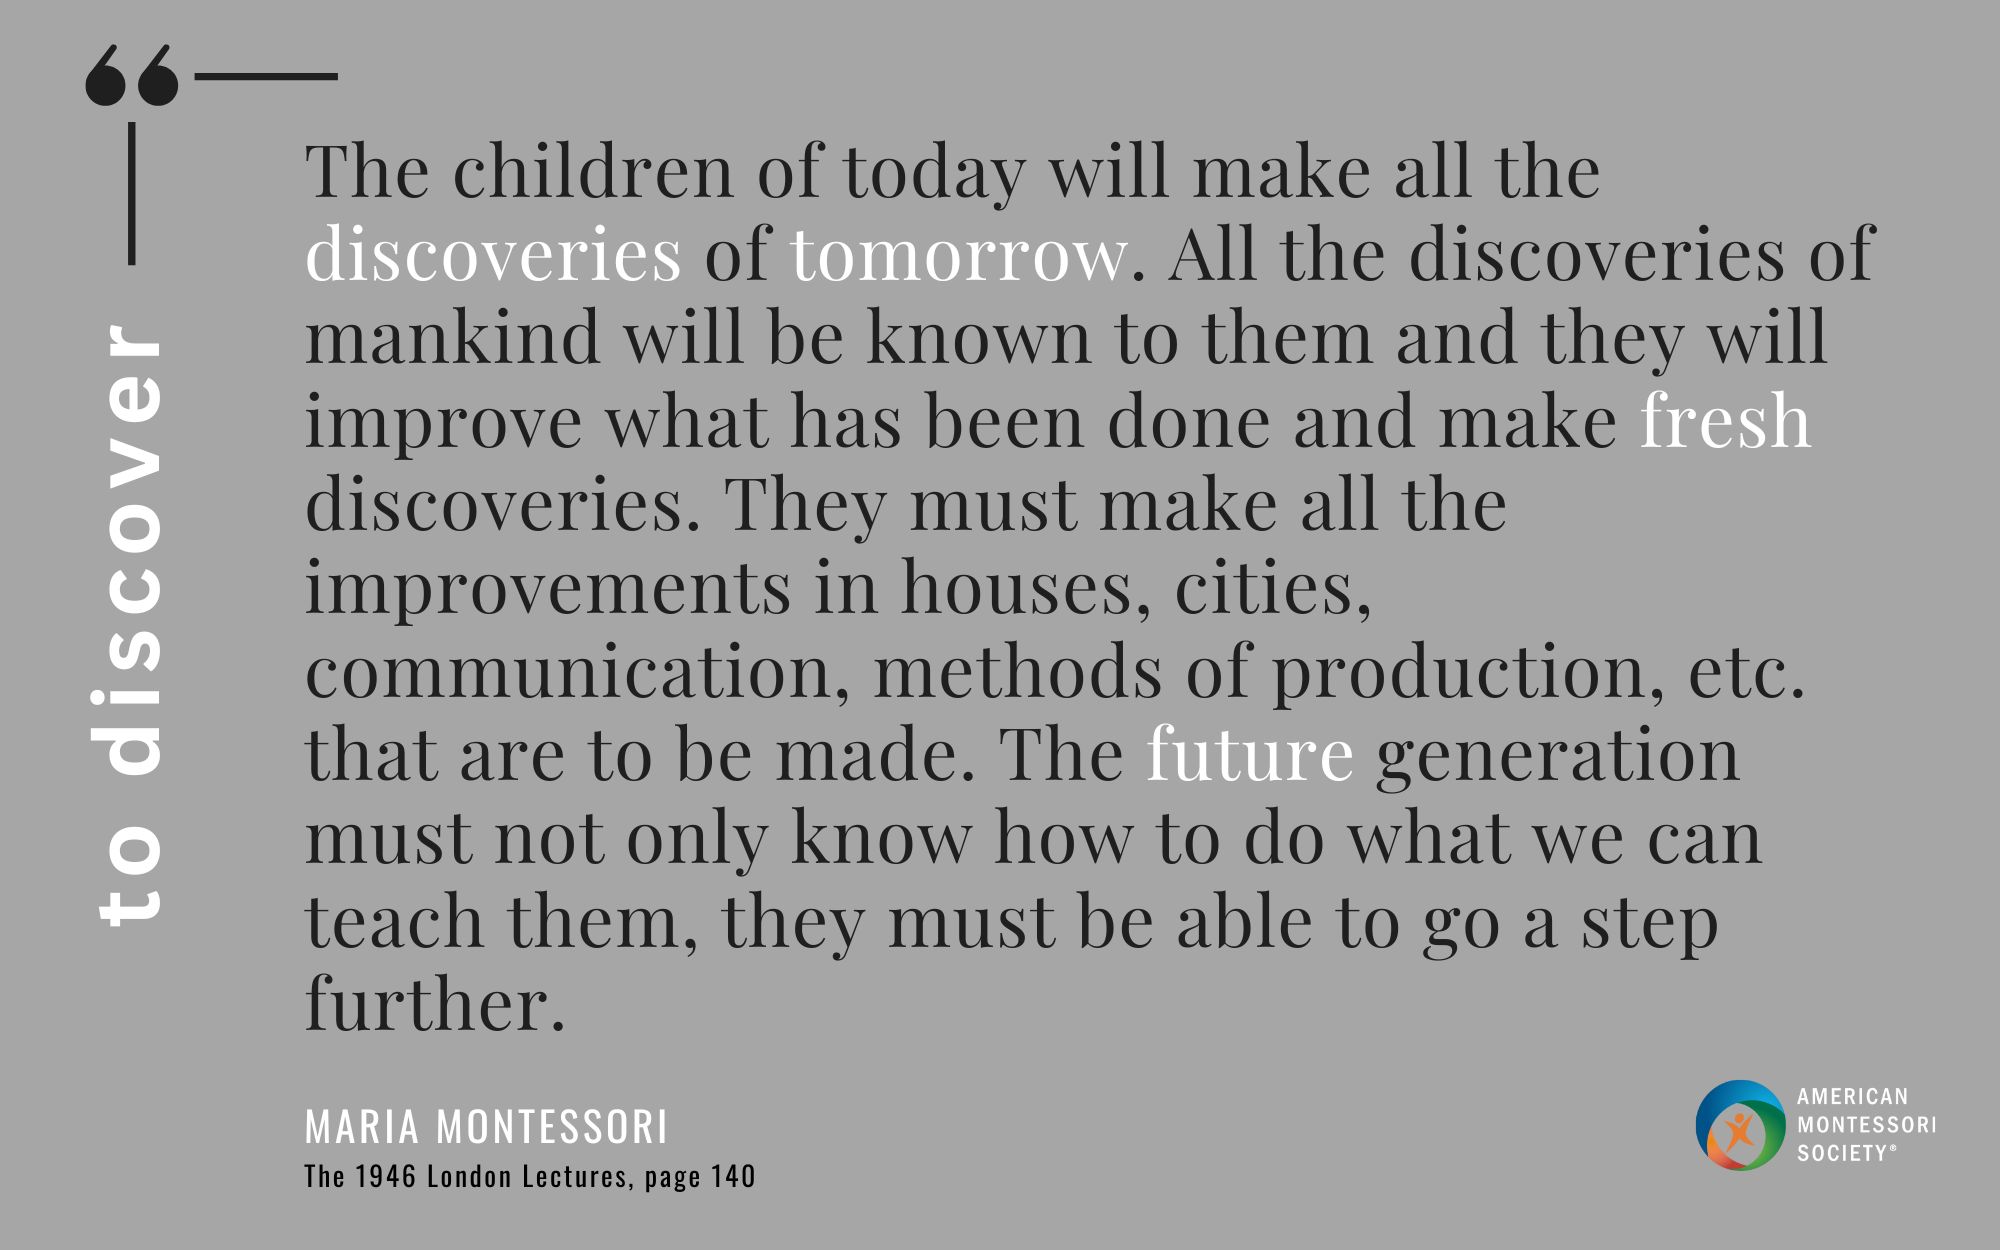 The children of today will make all the discoveries of tomorrow. All the discoveries of mankind will be known to them and they will improve what has been done and make fresh discoveries. They must make all the improvements in houses, cities, communication, methods of production, etc. that are to be made. The future generation must not only know how to do what we can teach them, they must be able to go a step further.